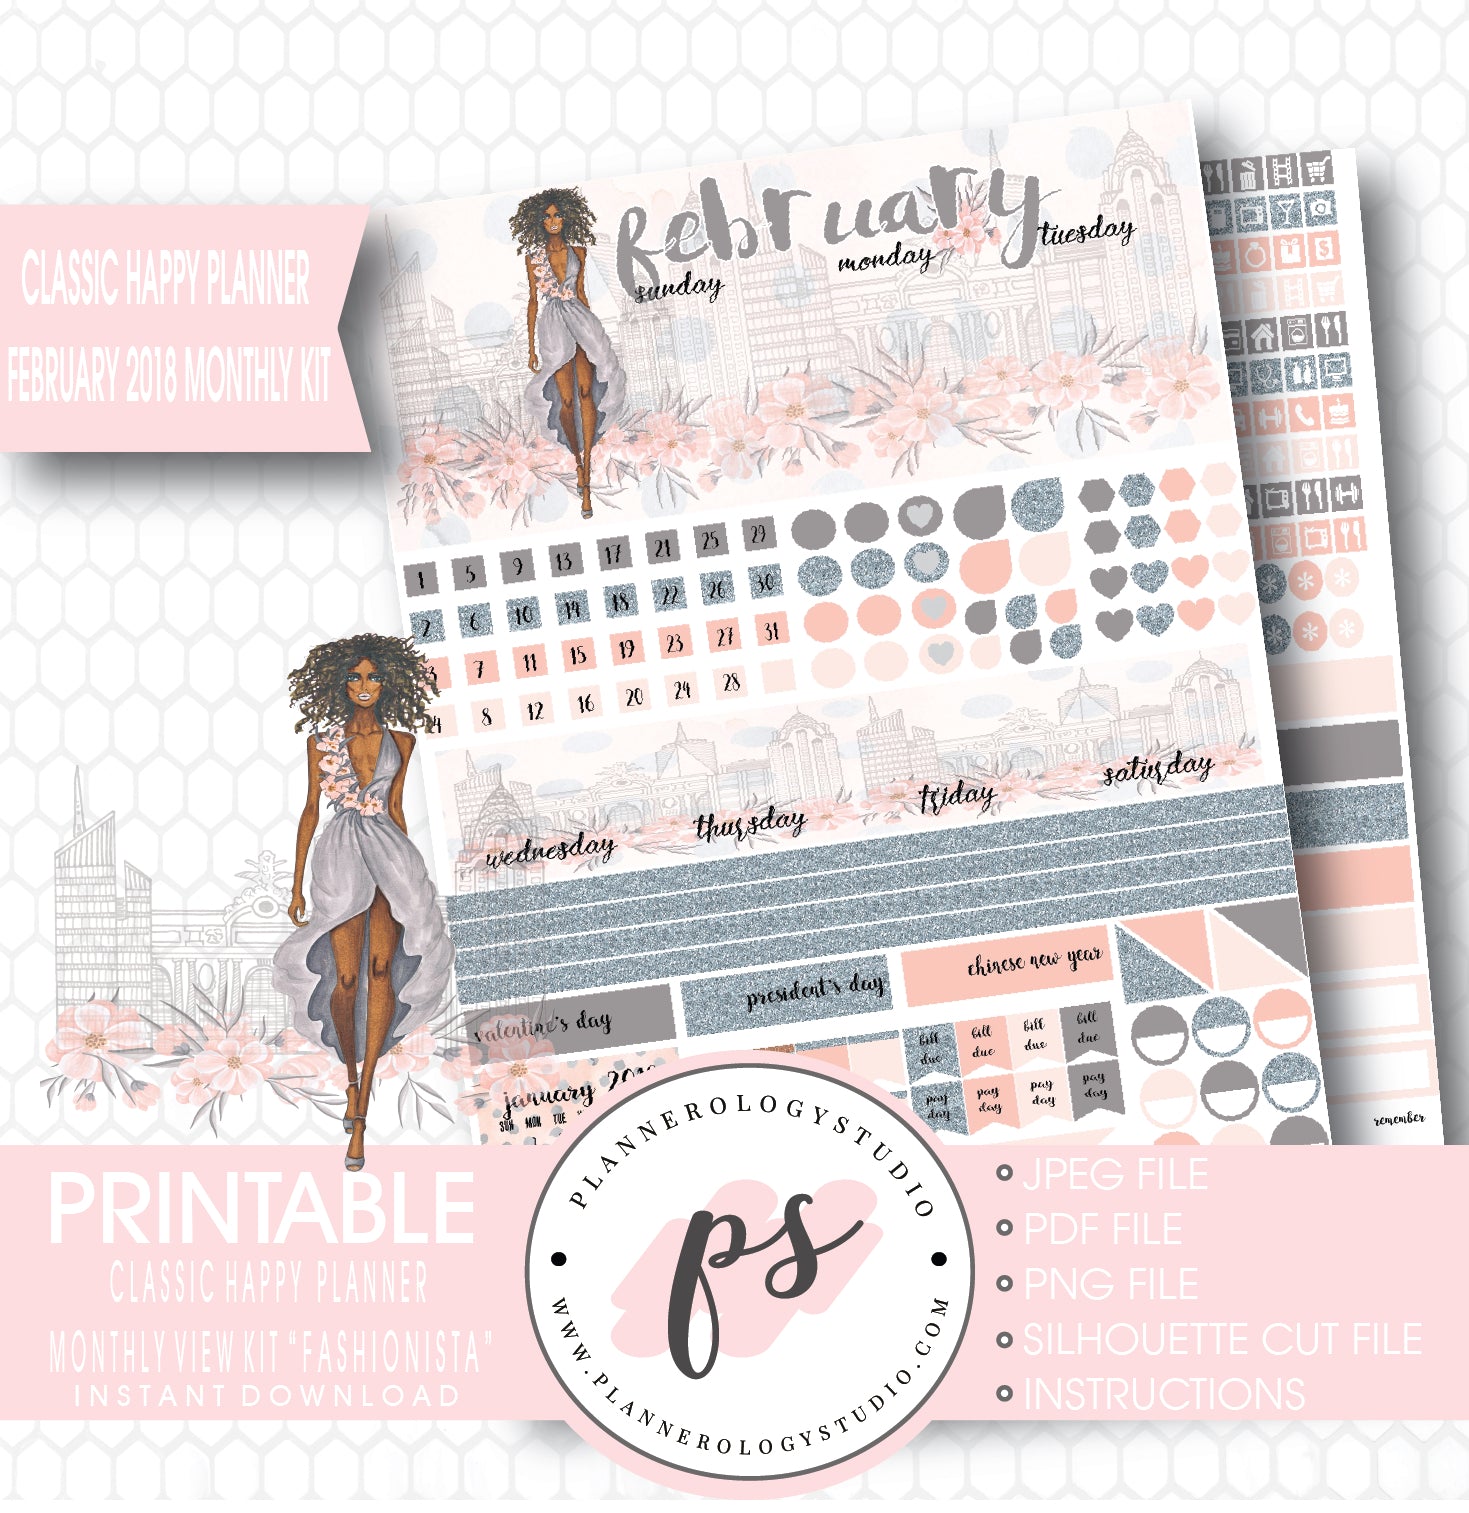 Fashionista (Dark Skin Tone) February 2018 Monthly View Kit Digital Printable Planner Stickers (for use with Classic Happy Planner) - Plannerologystudio